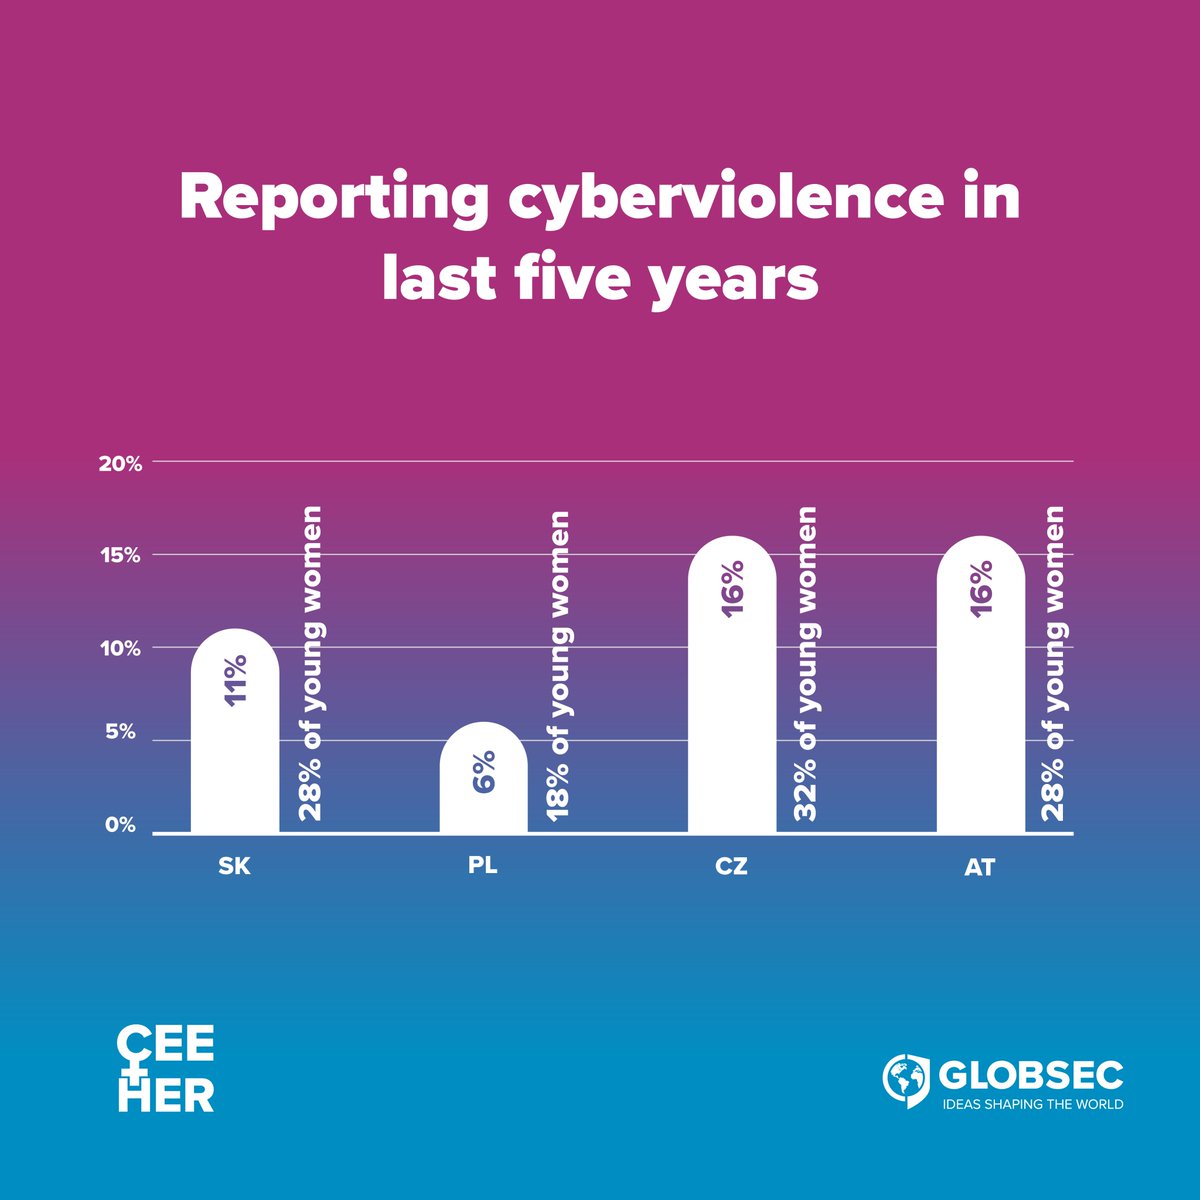 1 in 5 women in Austria have temporarily or permanently withdrawn from social media after experiencing cyberviolence. 

Cyberviolence can have serious impacts on victims, resulting in long-term psychological trauma. 

Learn more in our latest report: bit.ly/49KJ9rQ